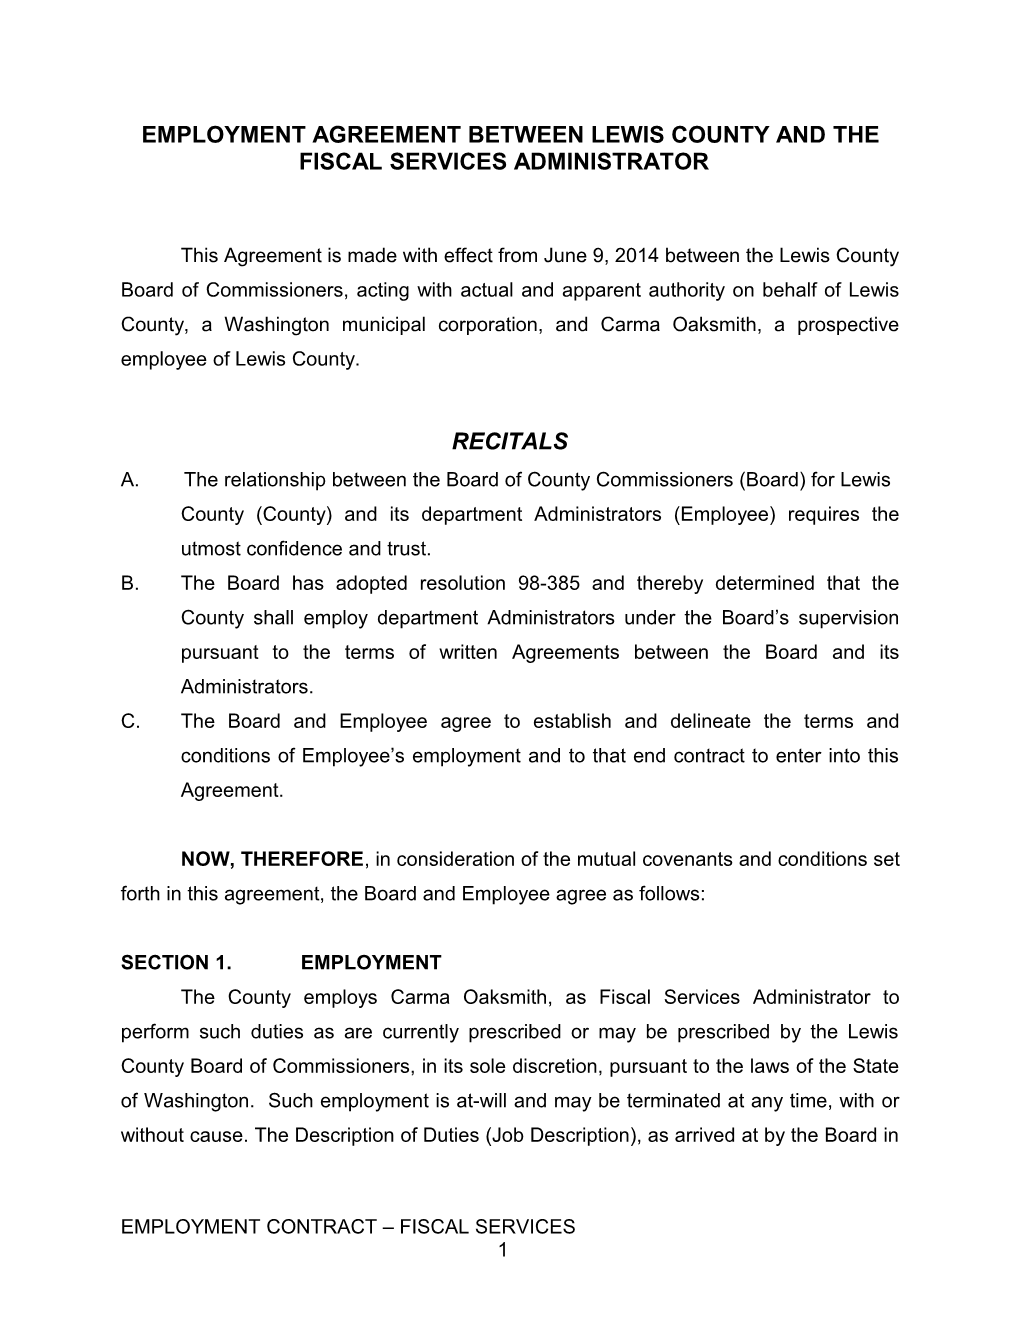 Employment Agreement Between Lewis County and Employee